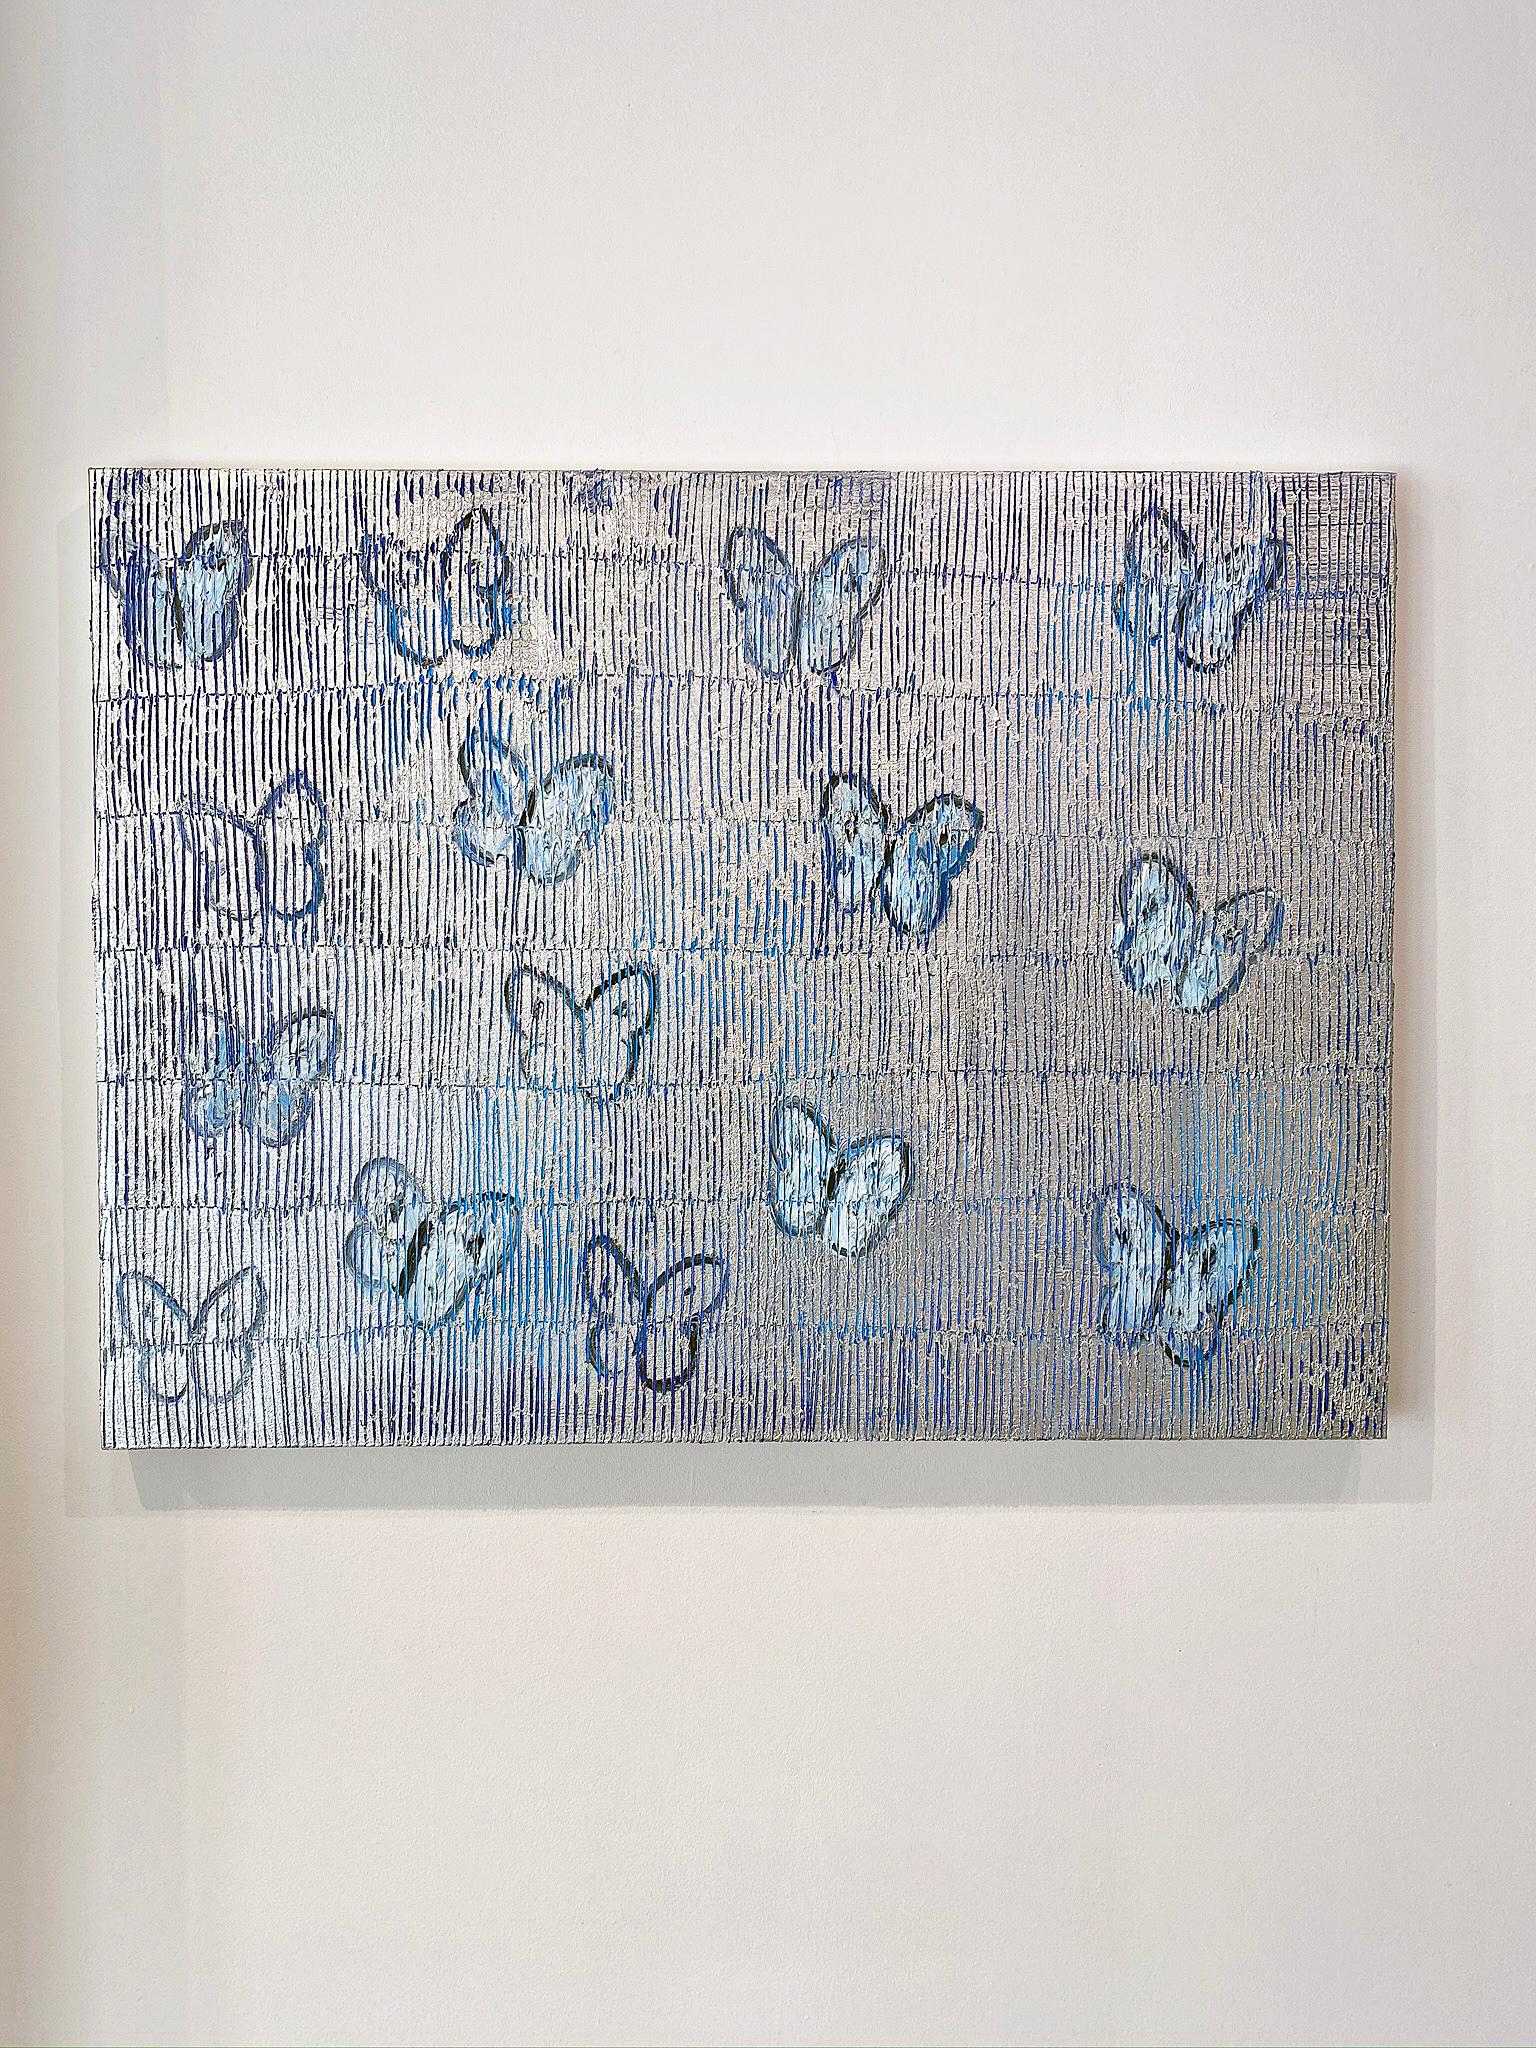 'Third Time Silver Ascension' 2019 by renowned New York City artist, Hunt Slonem. Oil on canvas, 30 x 40 in. This painting features a charming portrait of butterflies. The artist's ongoing experimentation with unconventional methodologies provide